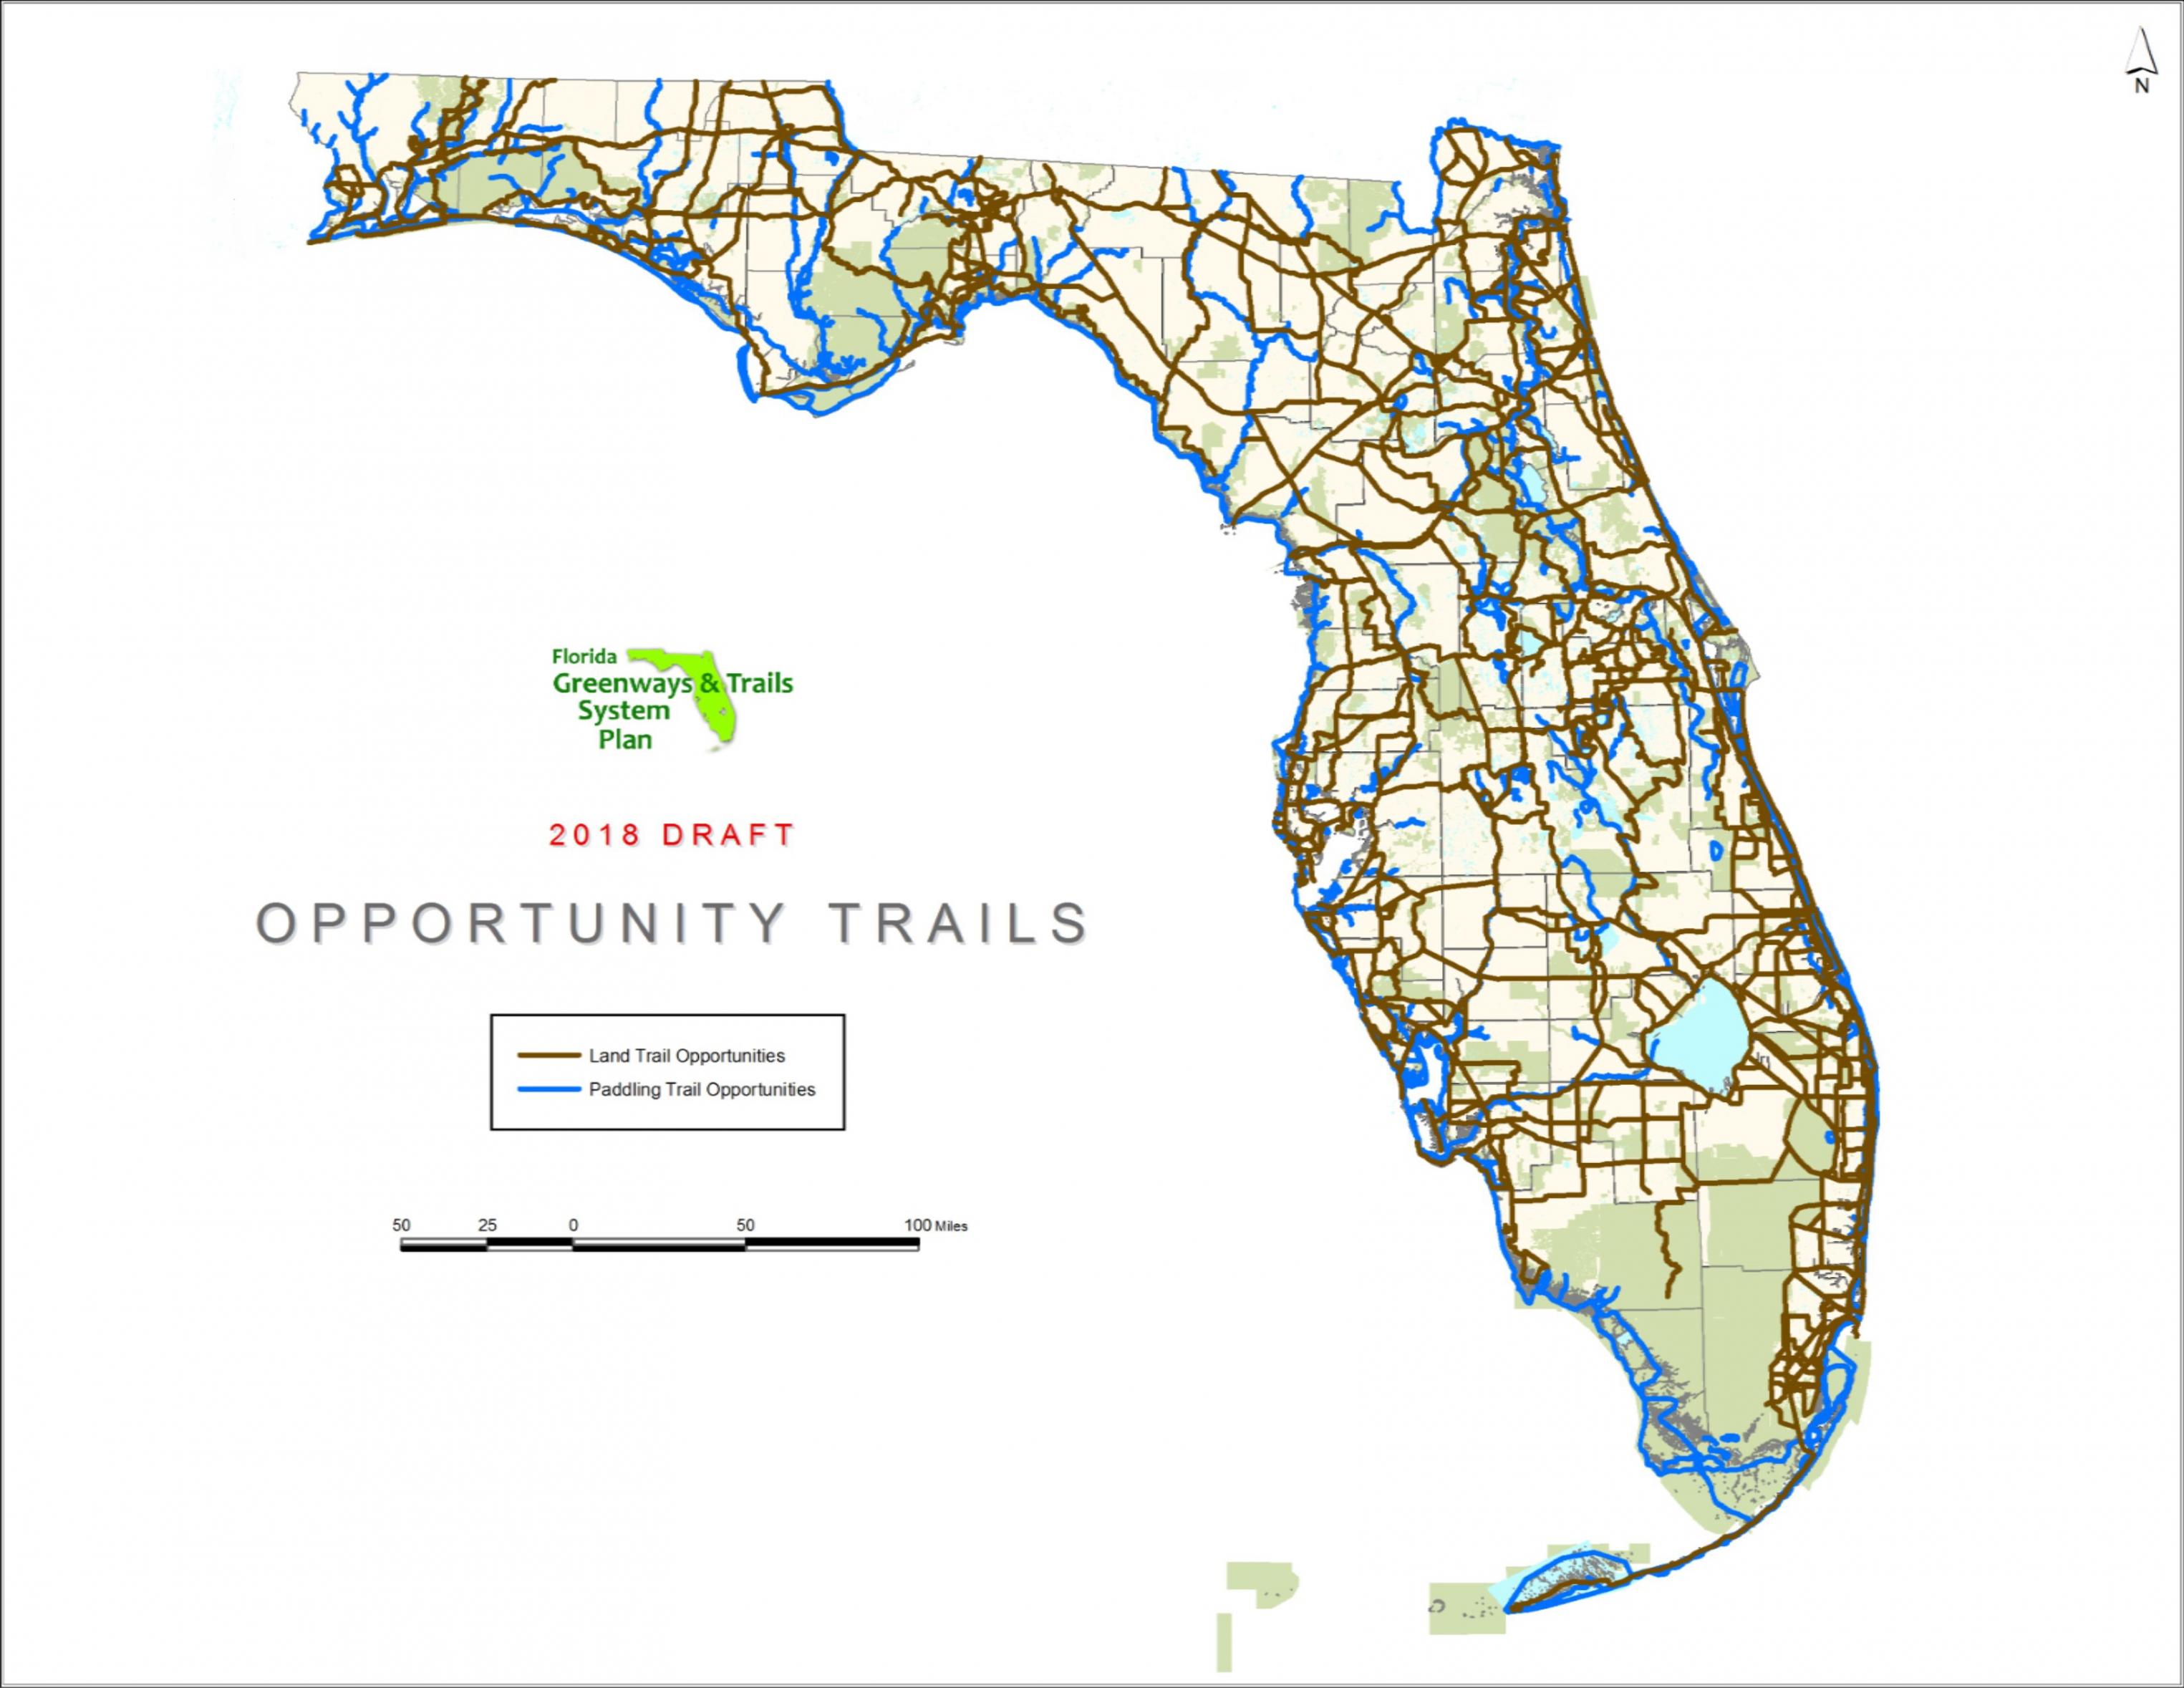 A map of Florida showing the 2018 through 2022 Opportunity Trails from the updated Florida Greenways and Trails System Plan draft.